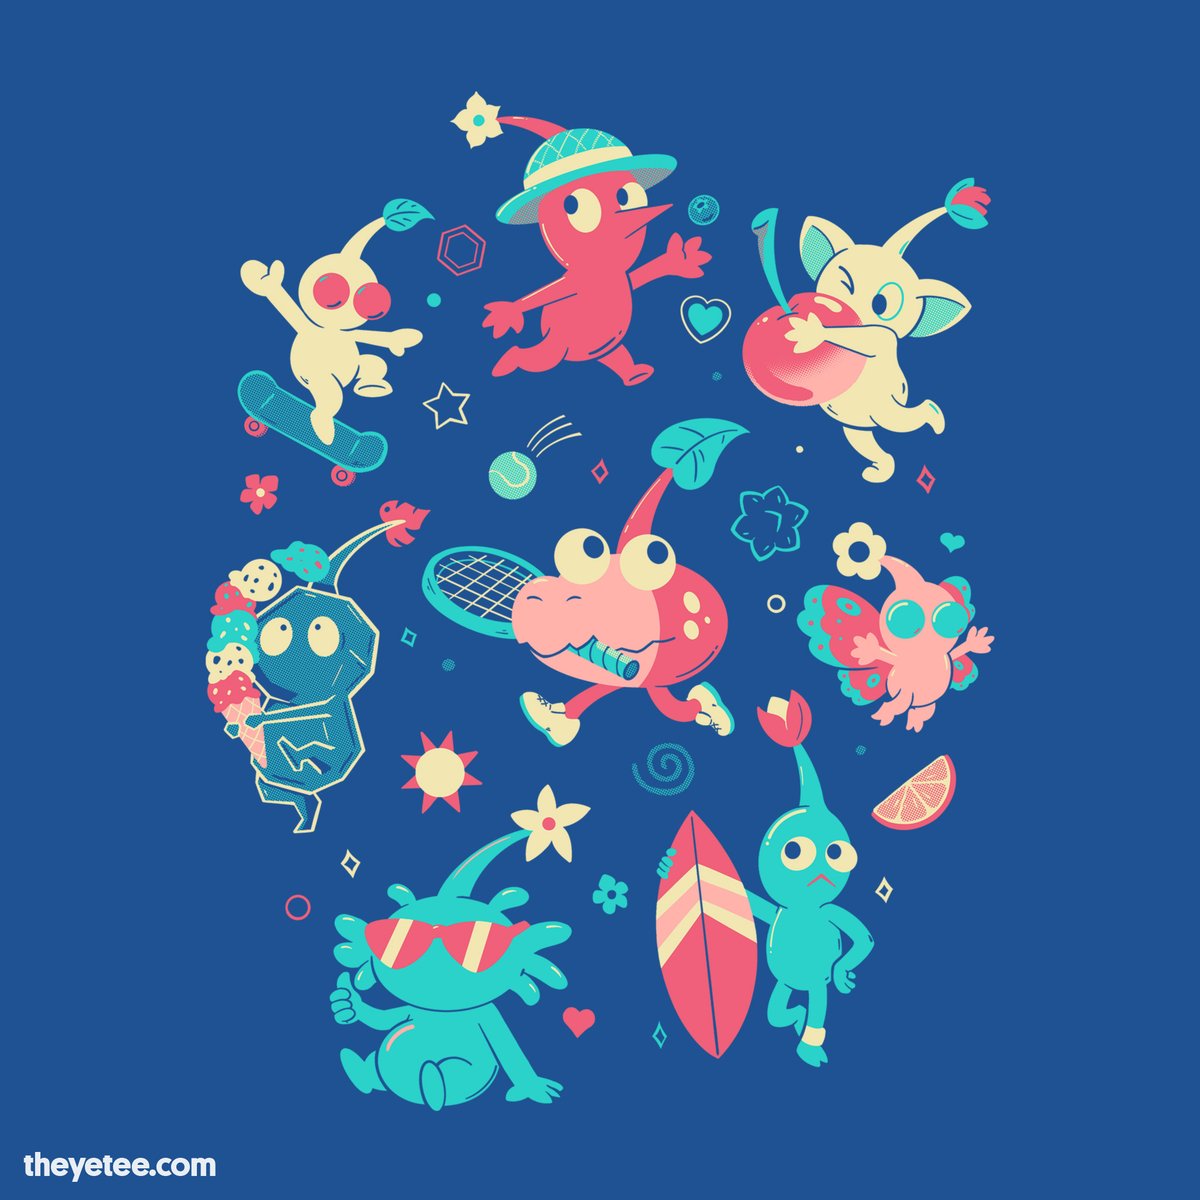 「You wouldn't believe how hard it is to f」|The Yetee 🌈のイラスト